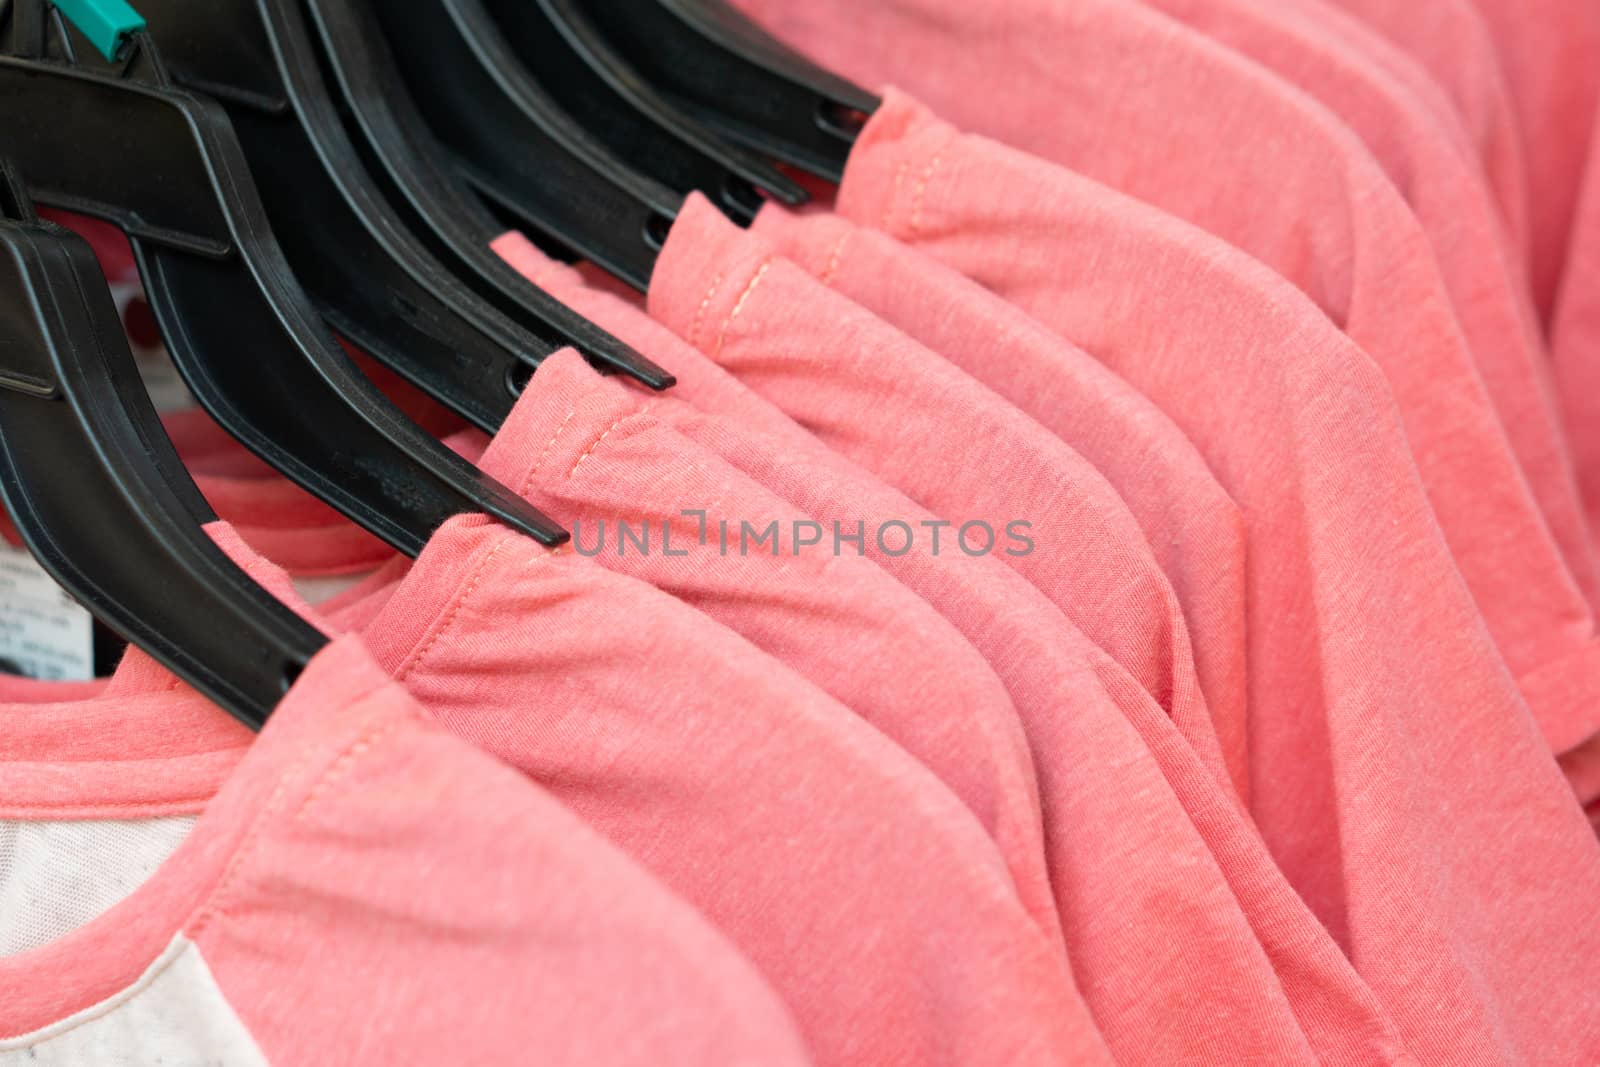 Row of pink t-shirts in a store.